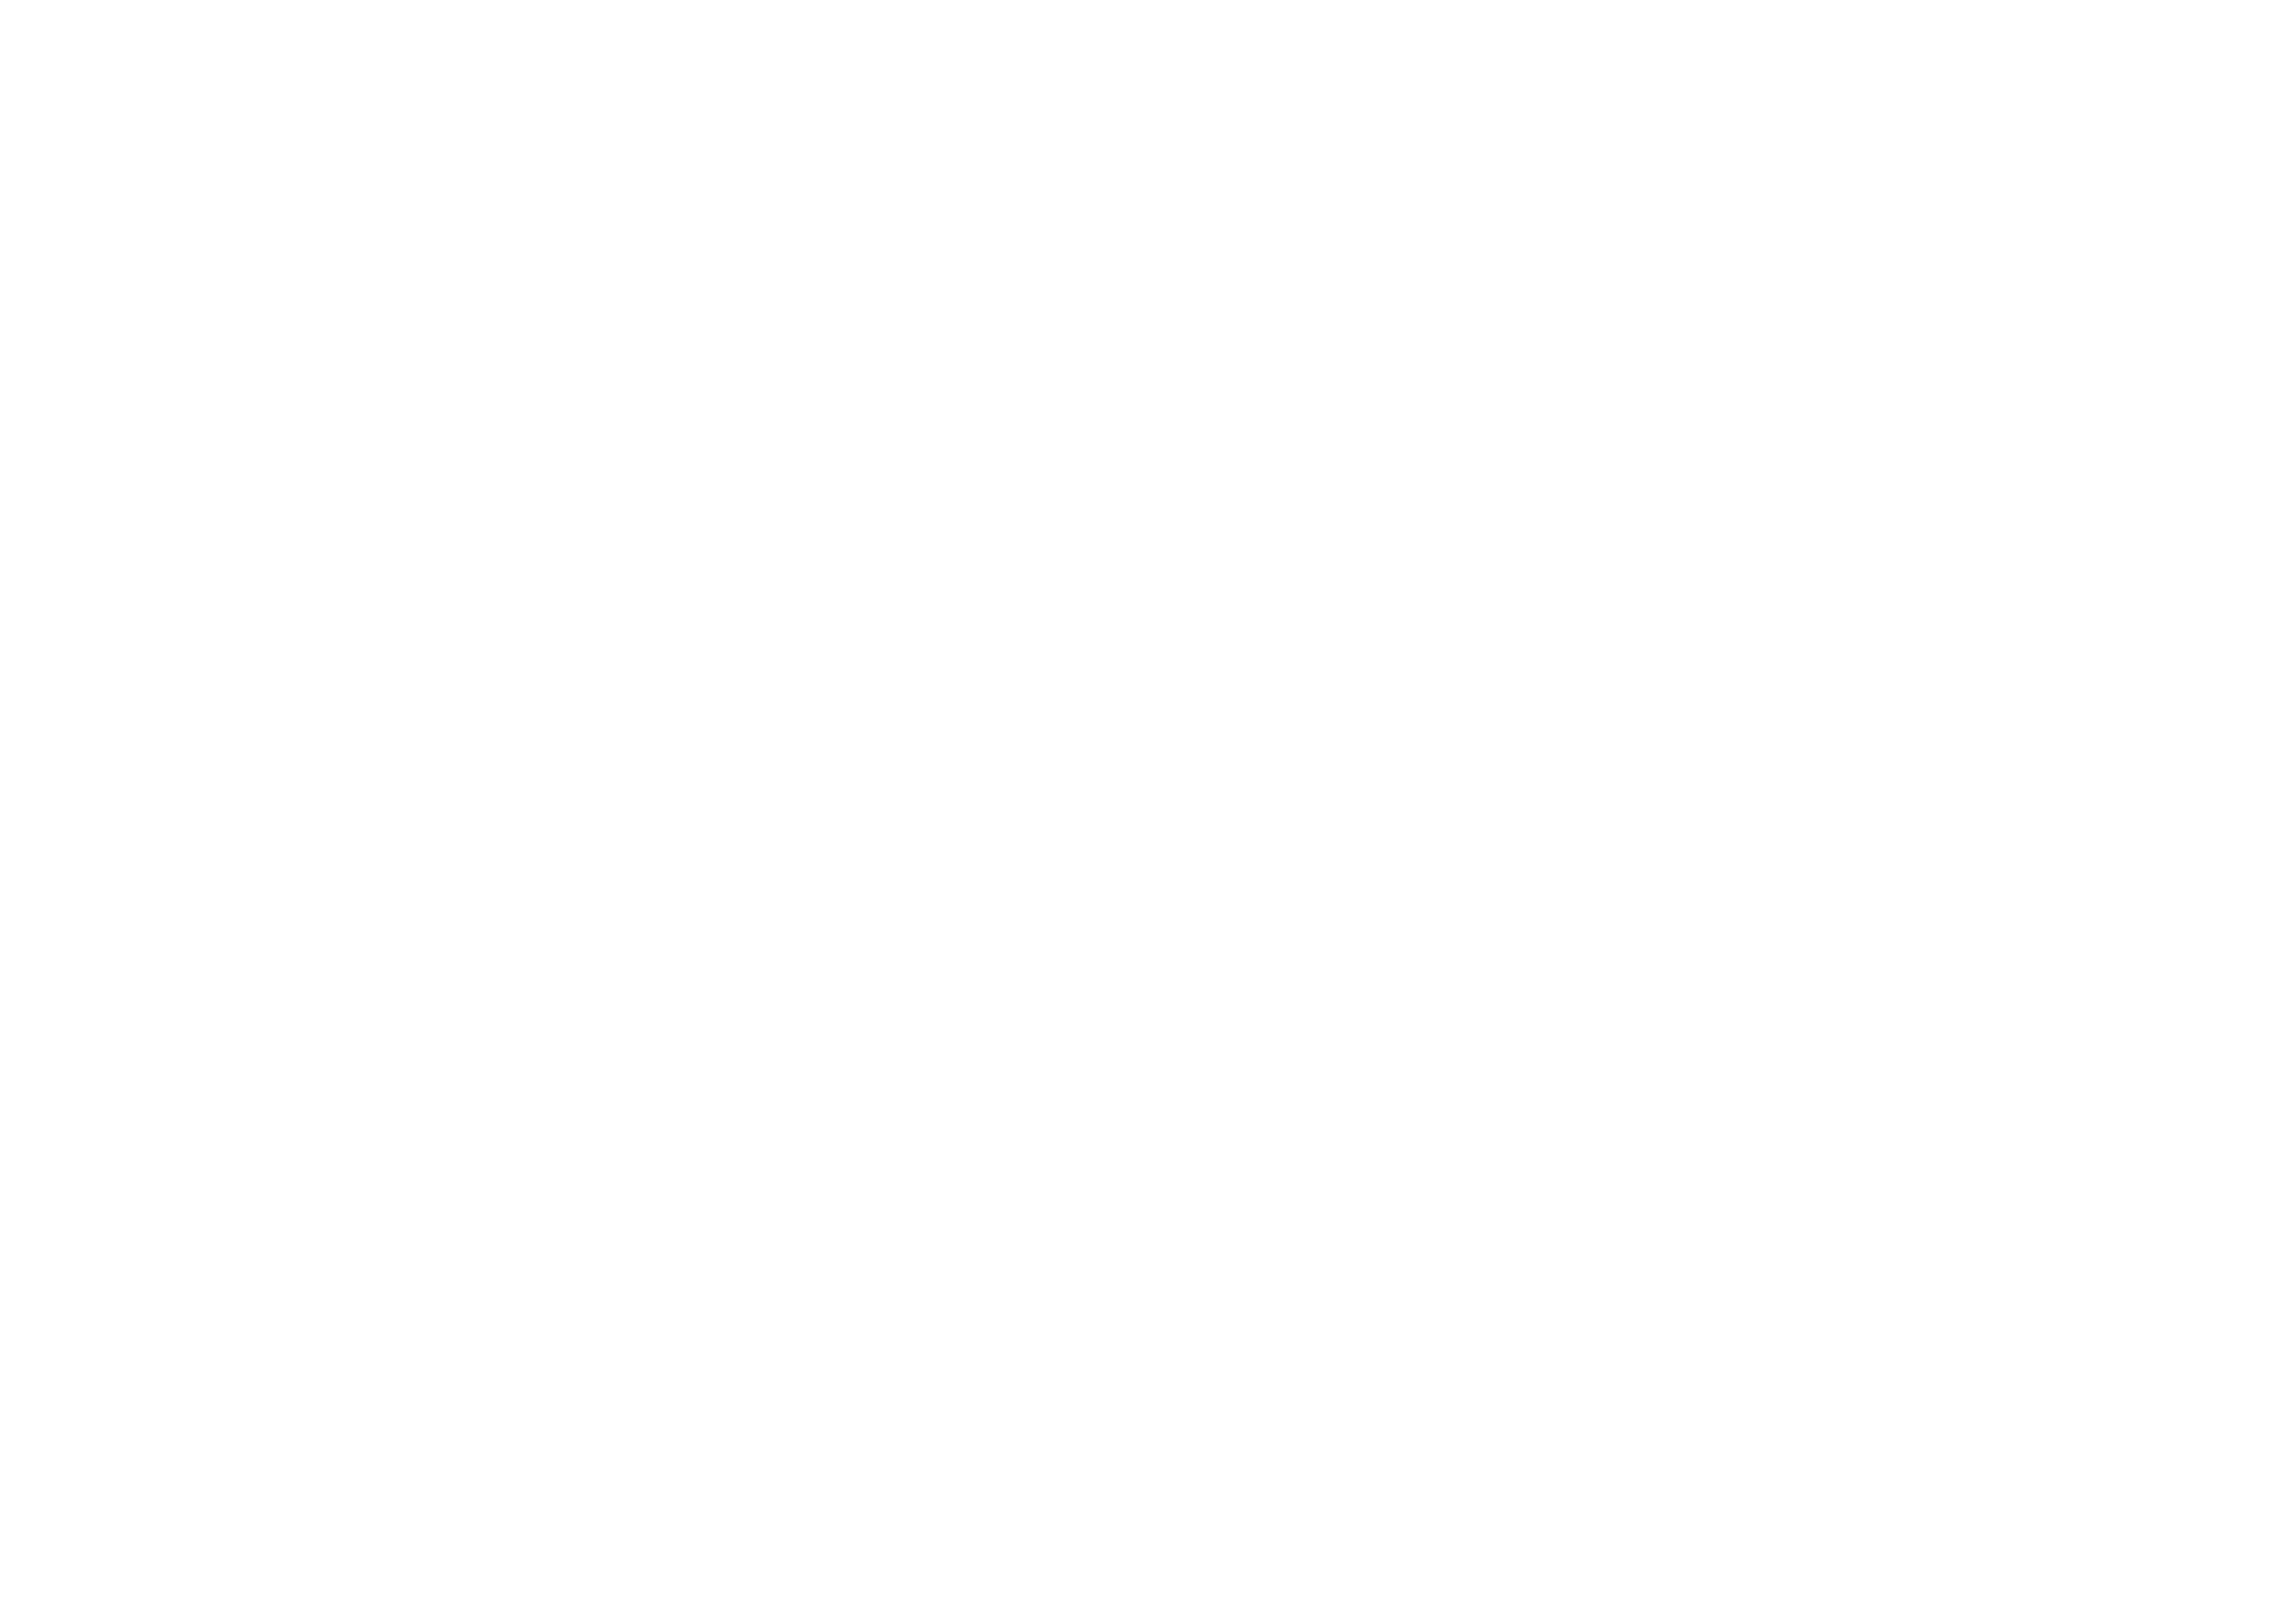 BEST COMEDY HORROR_w.png